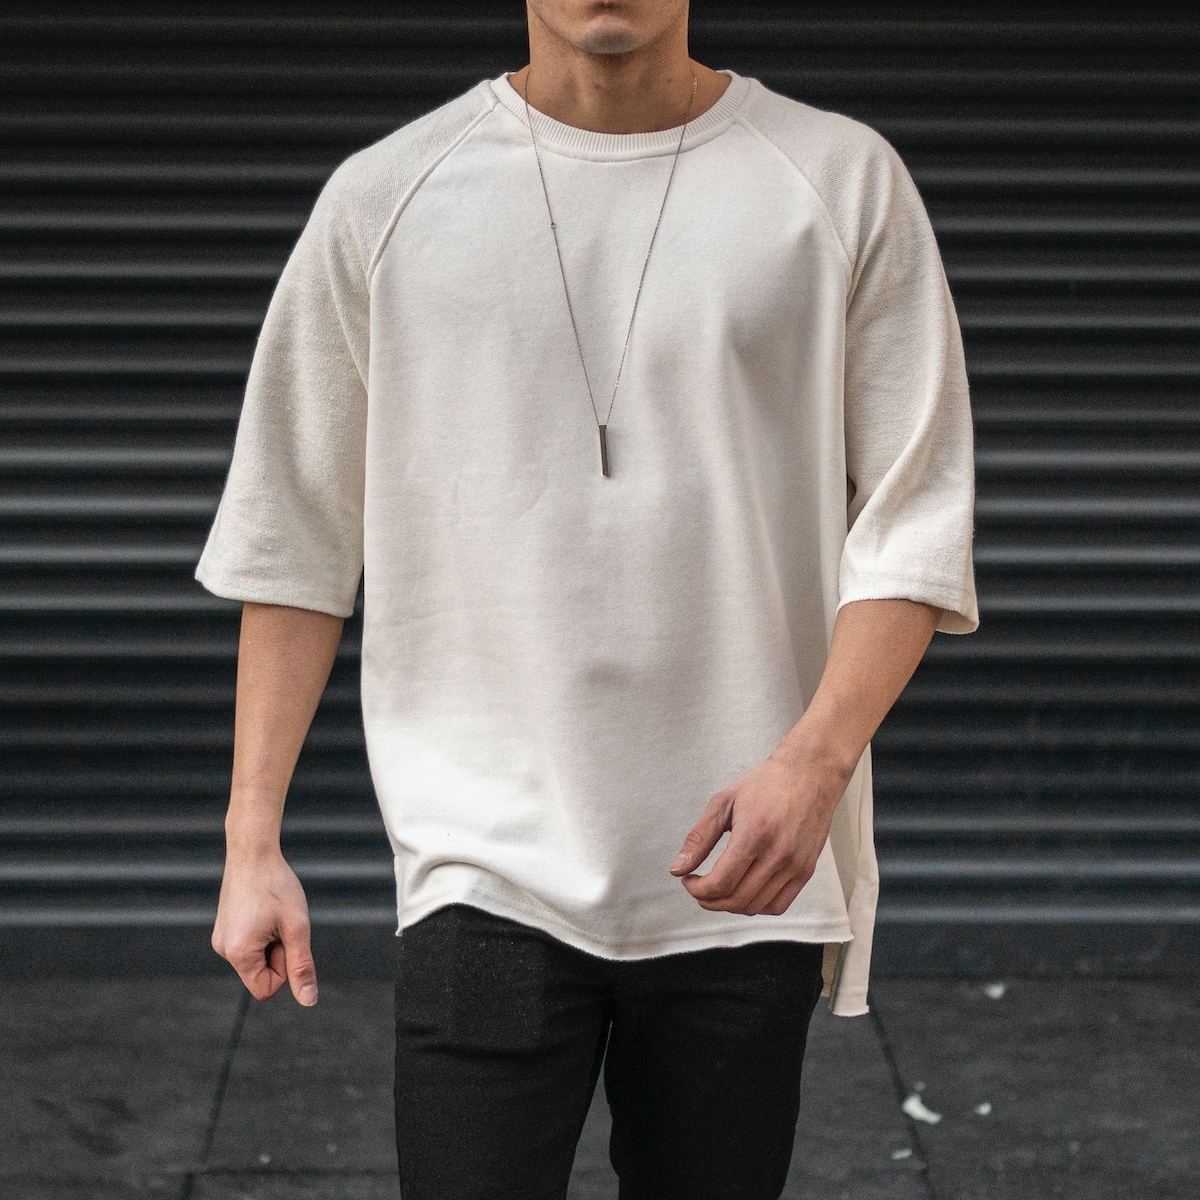 Men's Long Cut Slit T-Shirt With Textured Arm In White